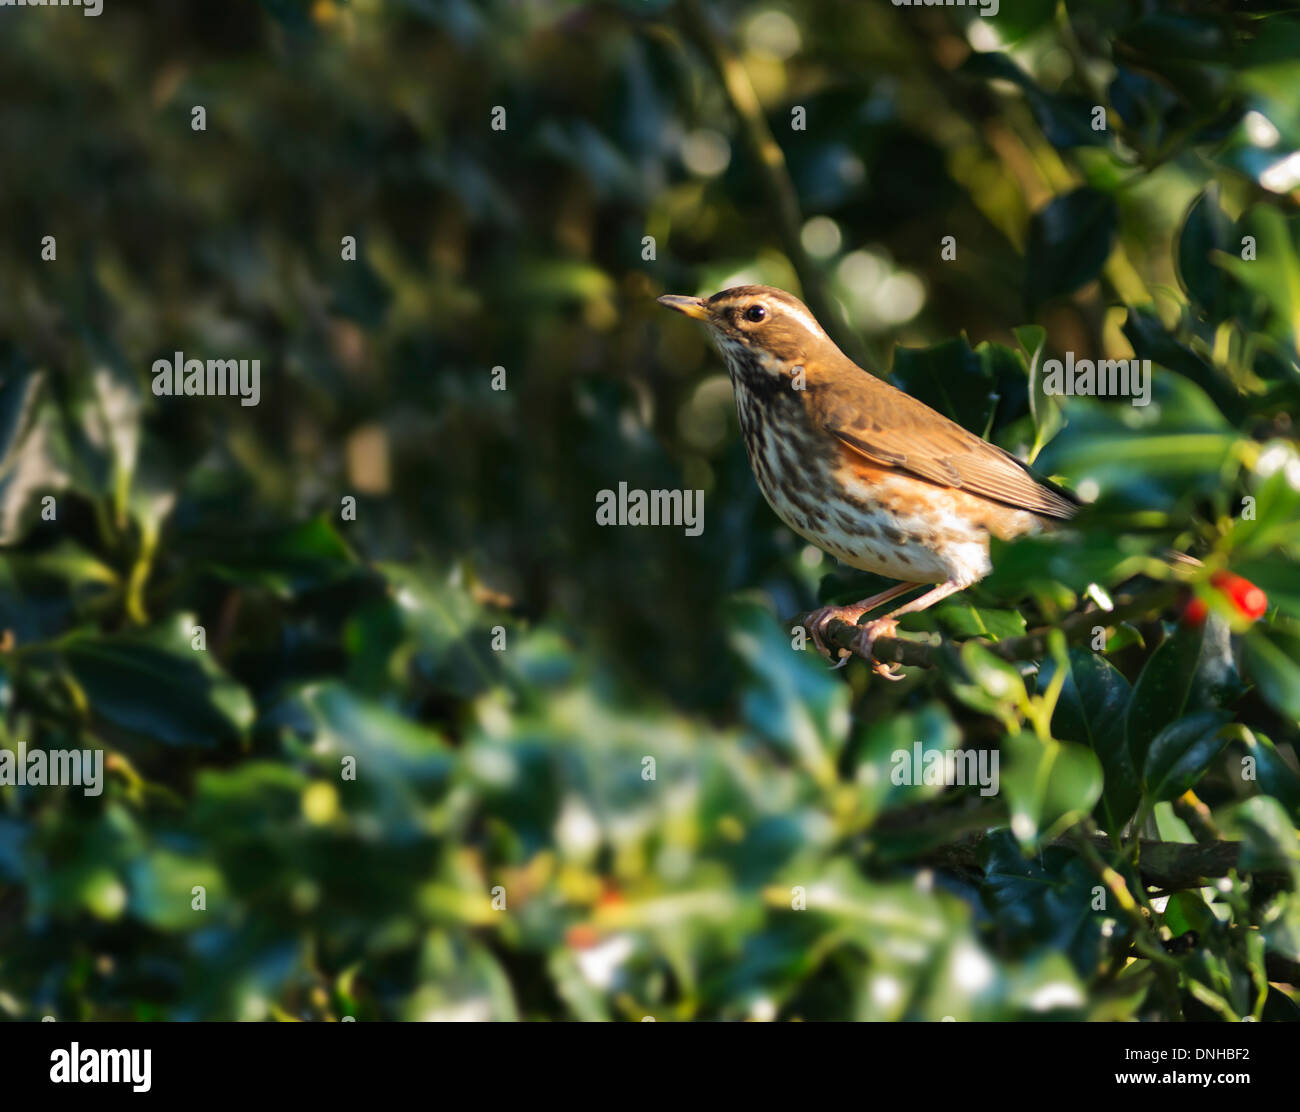 Redwing (Turdus iliacus) perched in holly tree Stock Photo